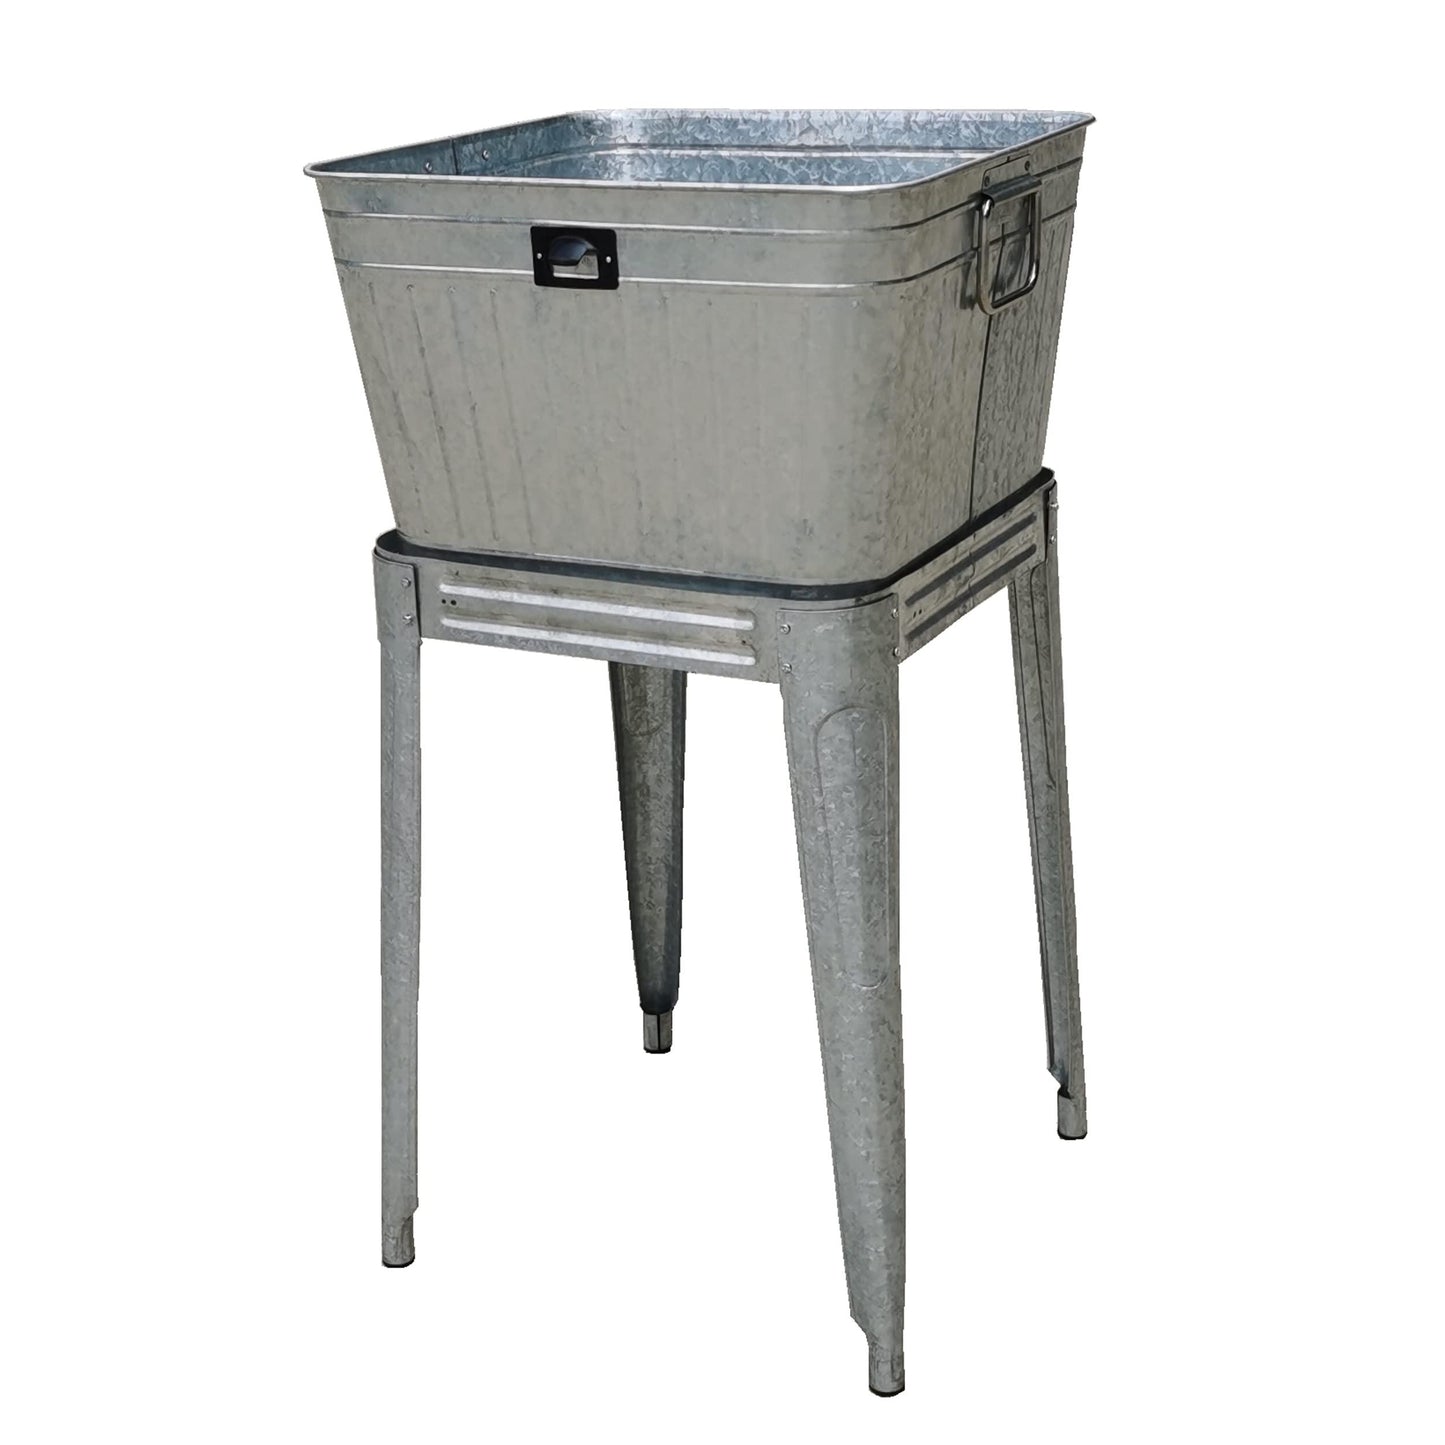 Metal Beverage Tub Cooler with Stand, Planter, Washbin - Rustic Grey - Backyard Expressions - CookCave